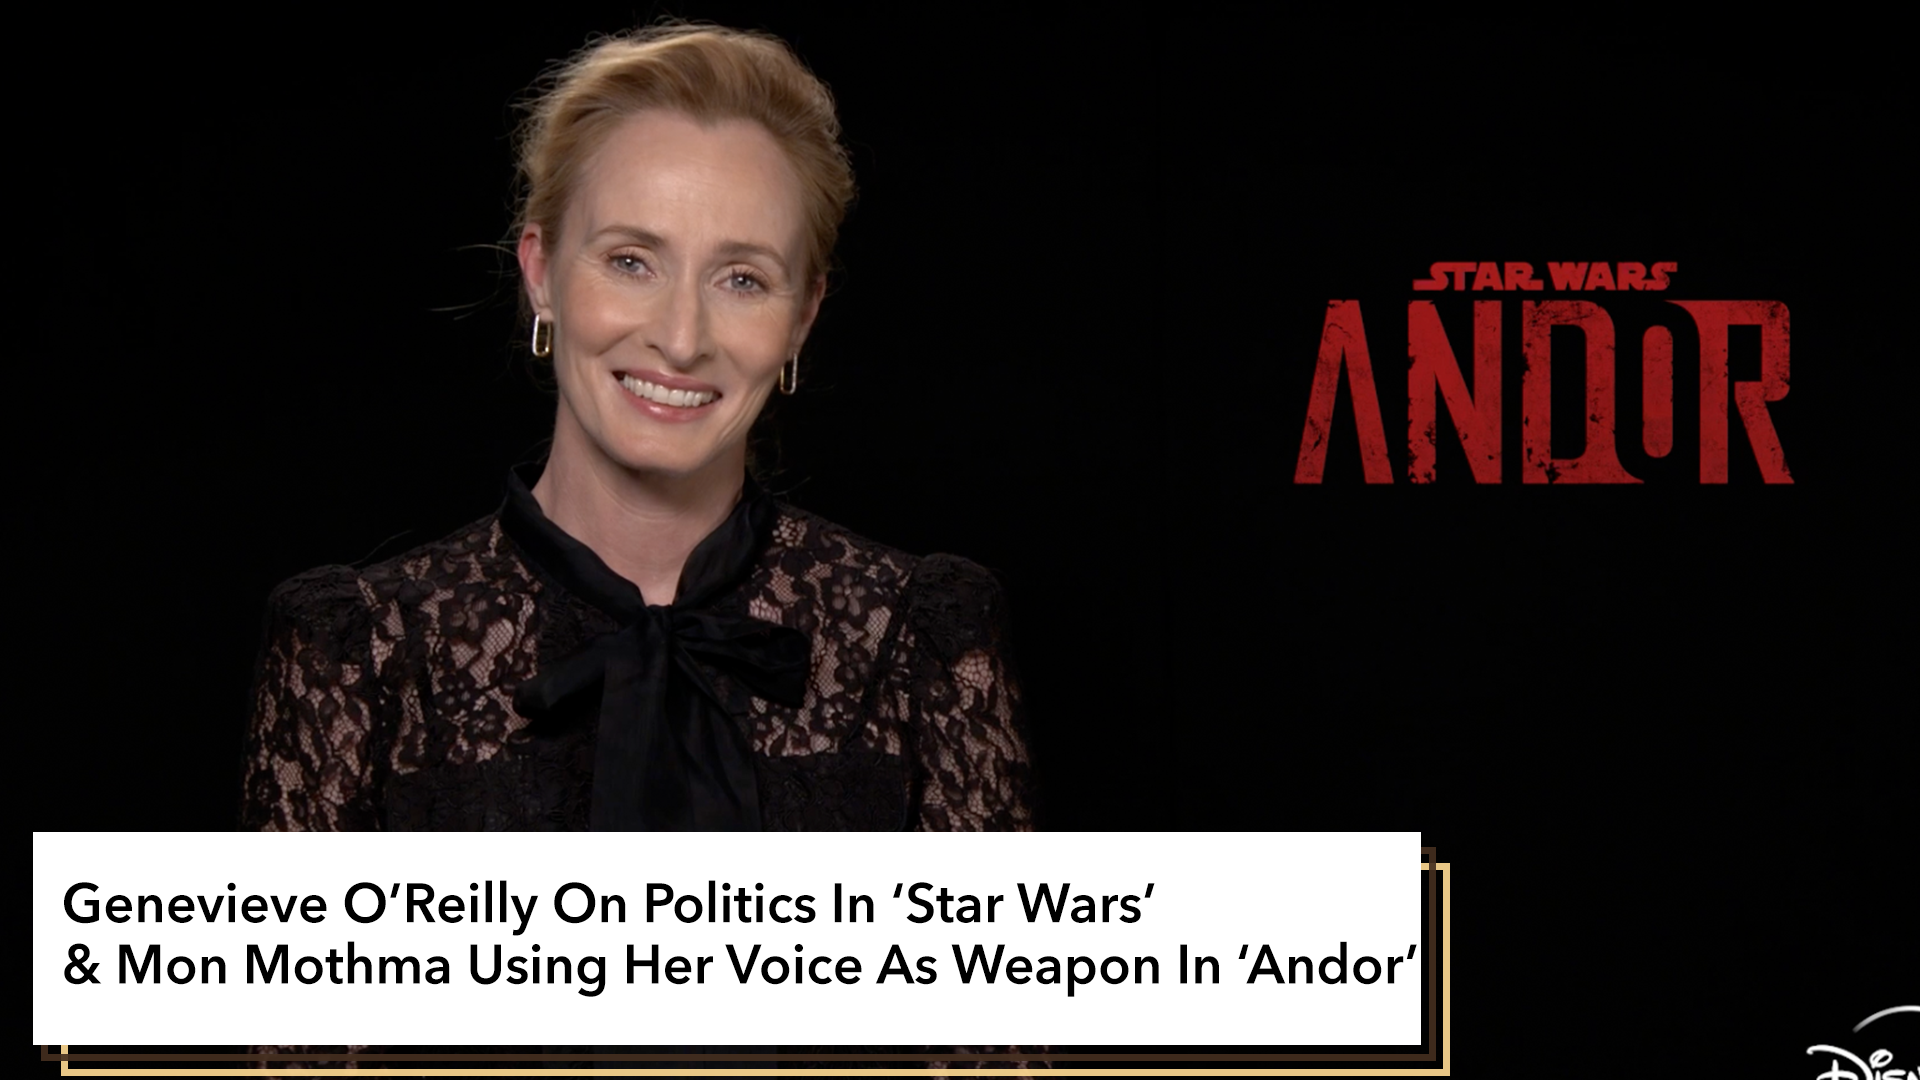 Interview: Genevieve O’Reilly On Politics In ‘Star Wars’ & Mon Mothma Using Her Voice As Weapon In ‘Andor’